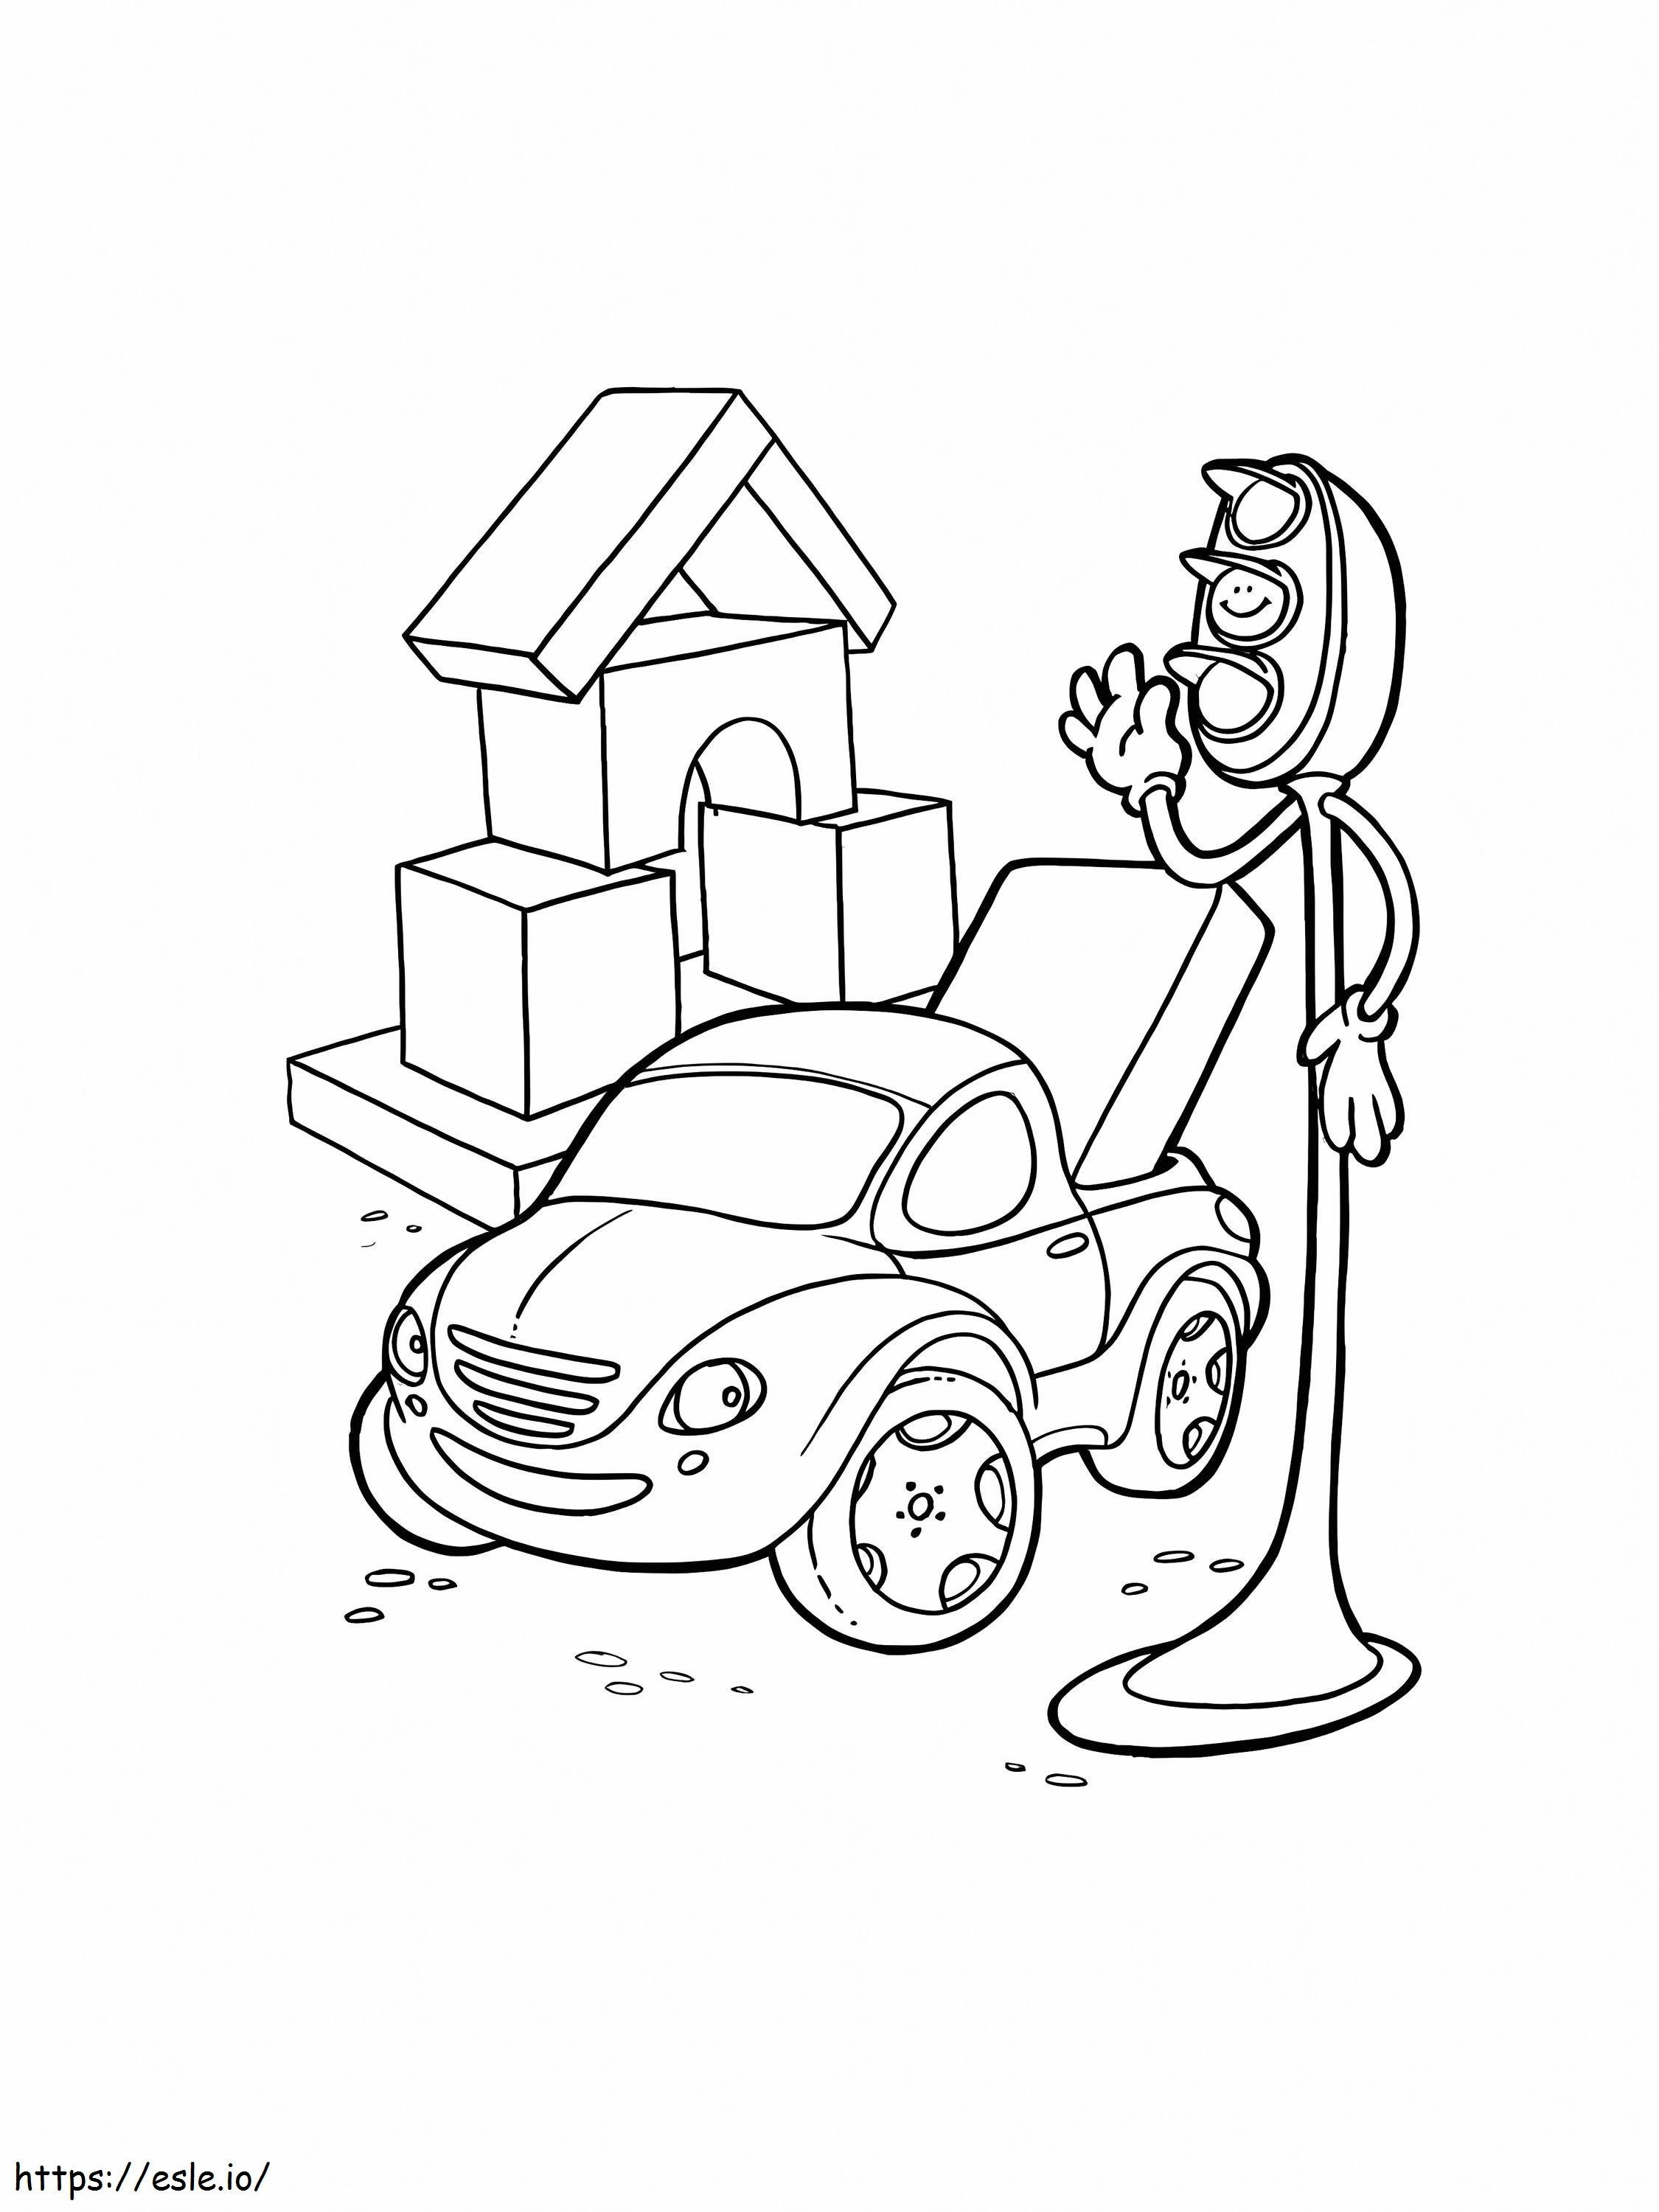 Funny Traffic Light coloring page